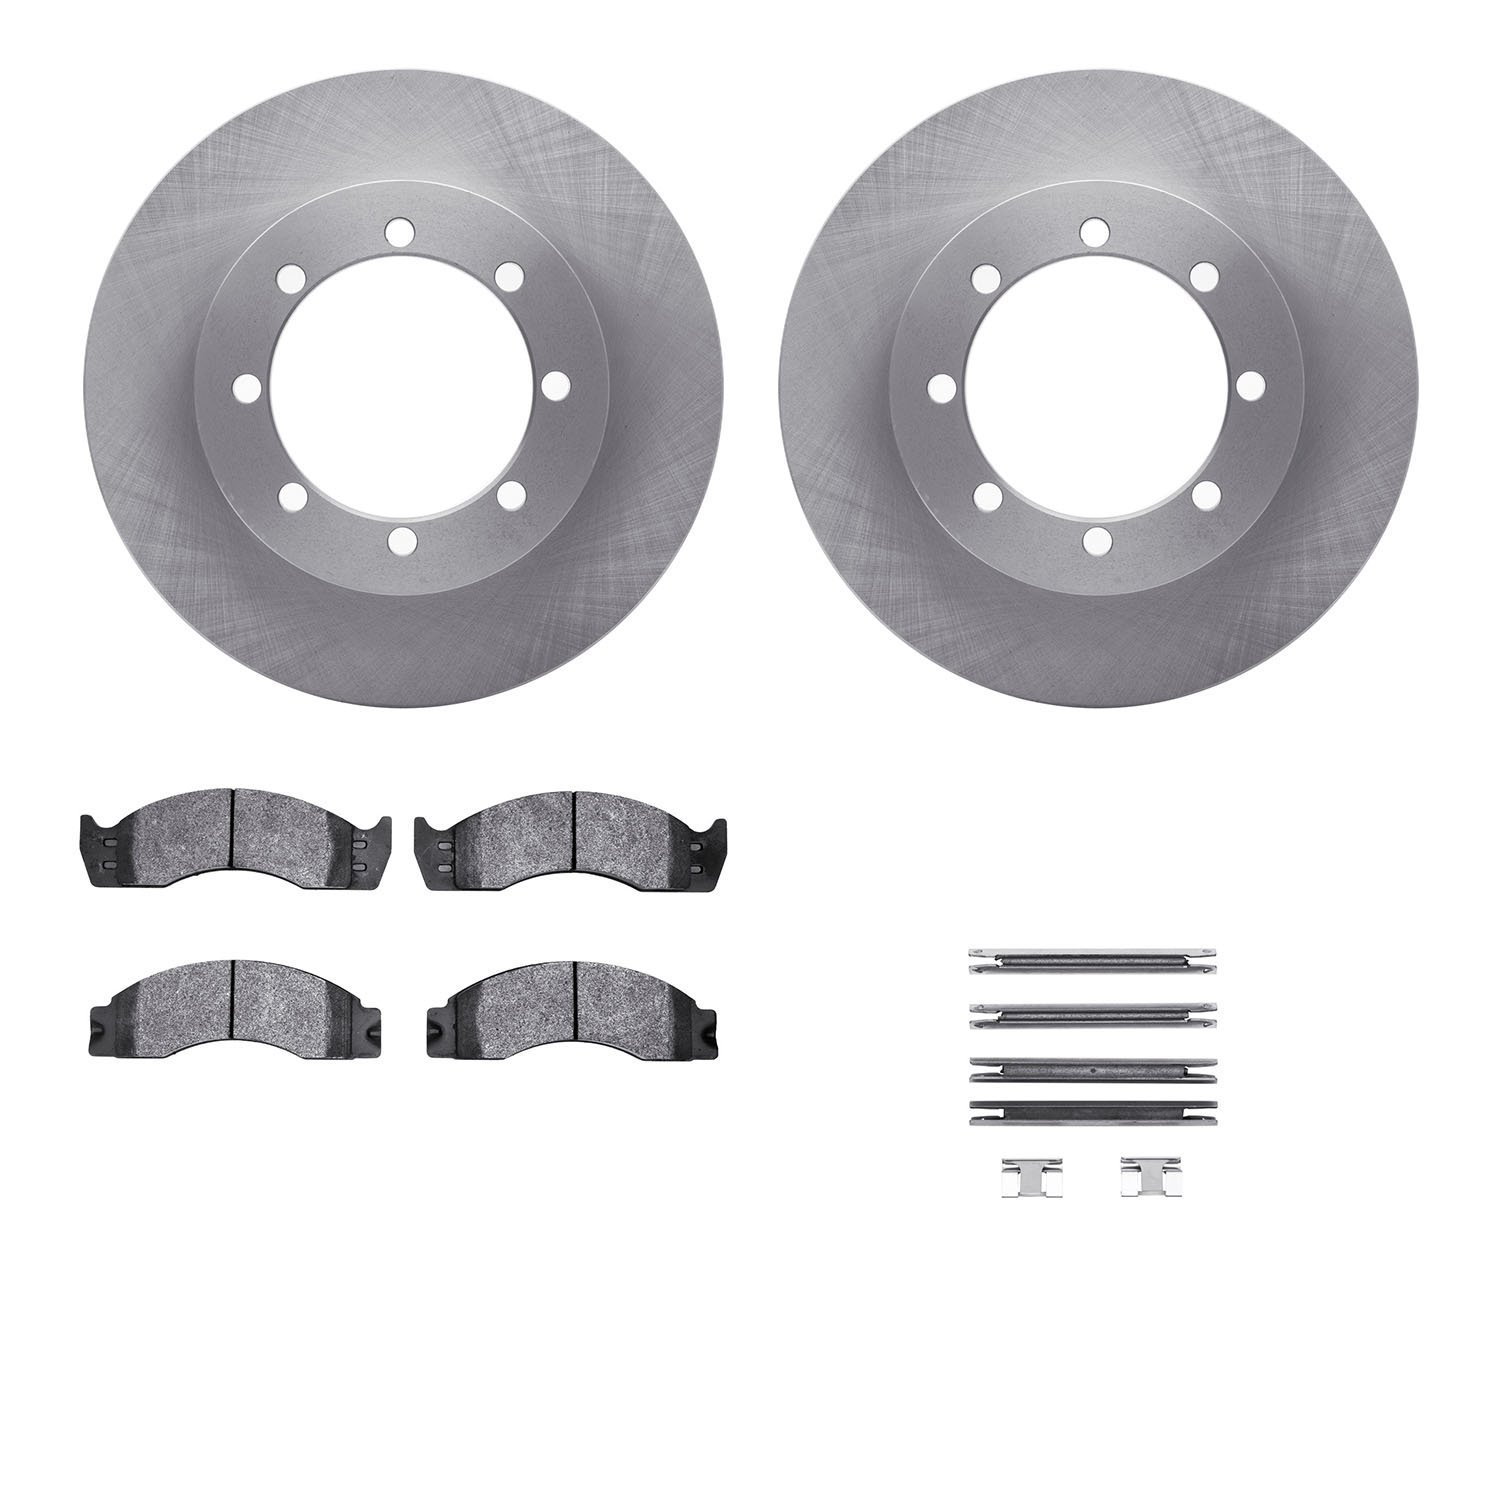 6412-54116 Brake Rotors with Ultimate-Duty Brake Pads Kit & Hardware, 2003-2007 Ford/Lincoln/Mercury/Mazda, Position: Rear